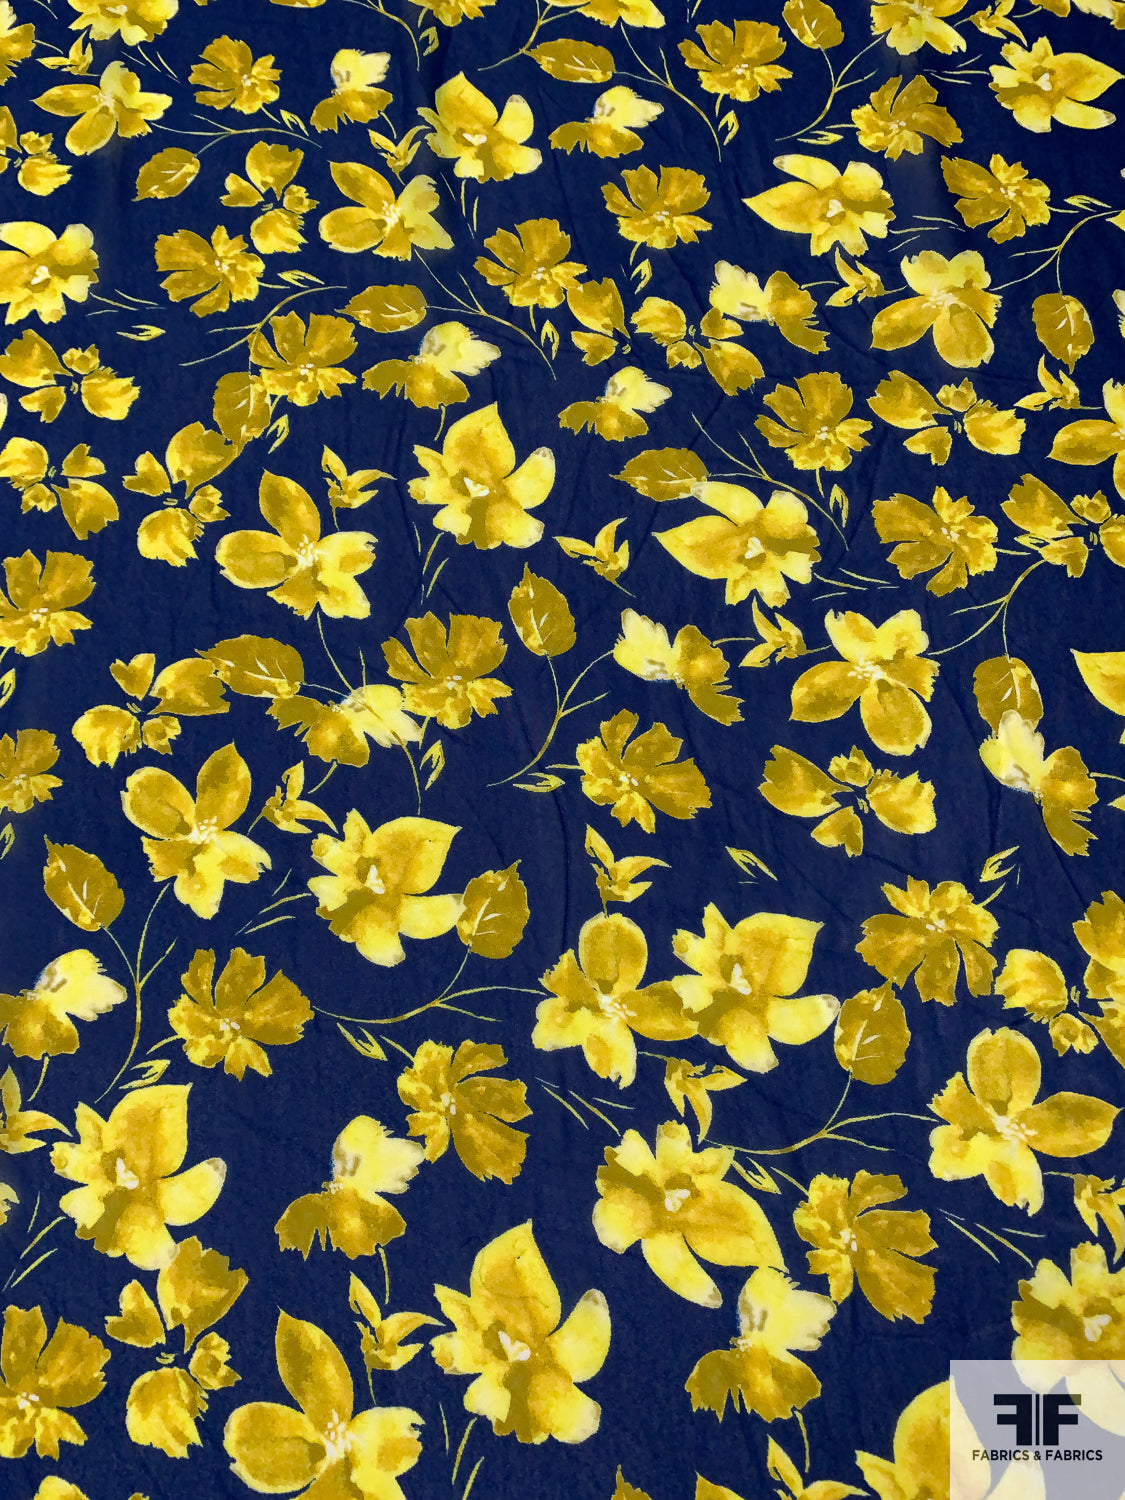 Floral Leaf Printed Fine Rayon Georgette - Navy Blue / Yellow